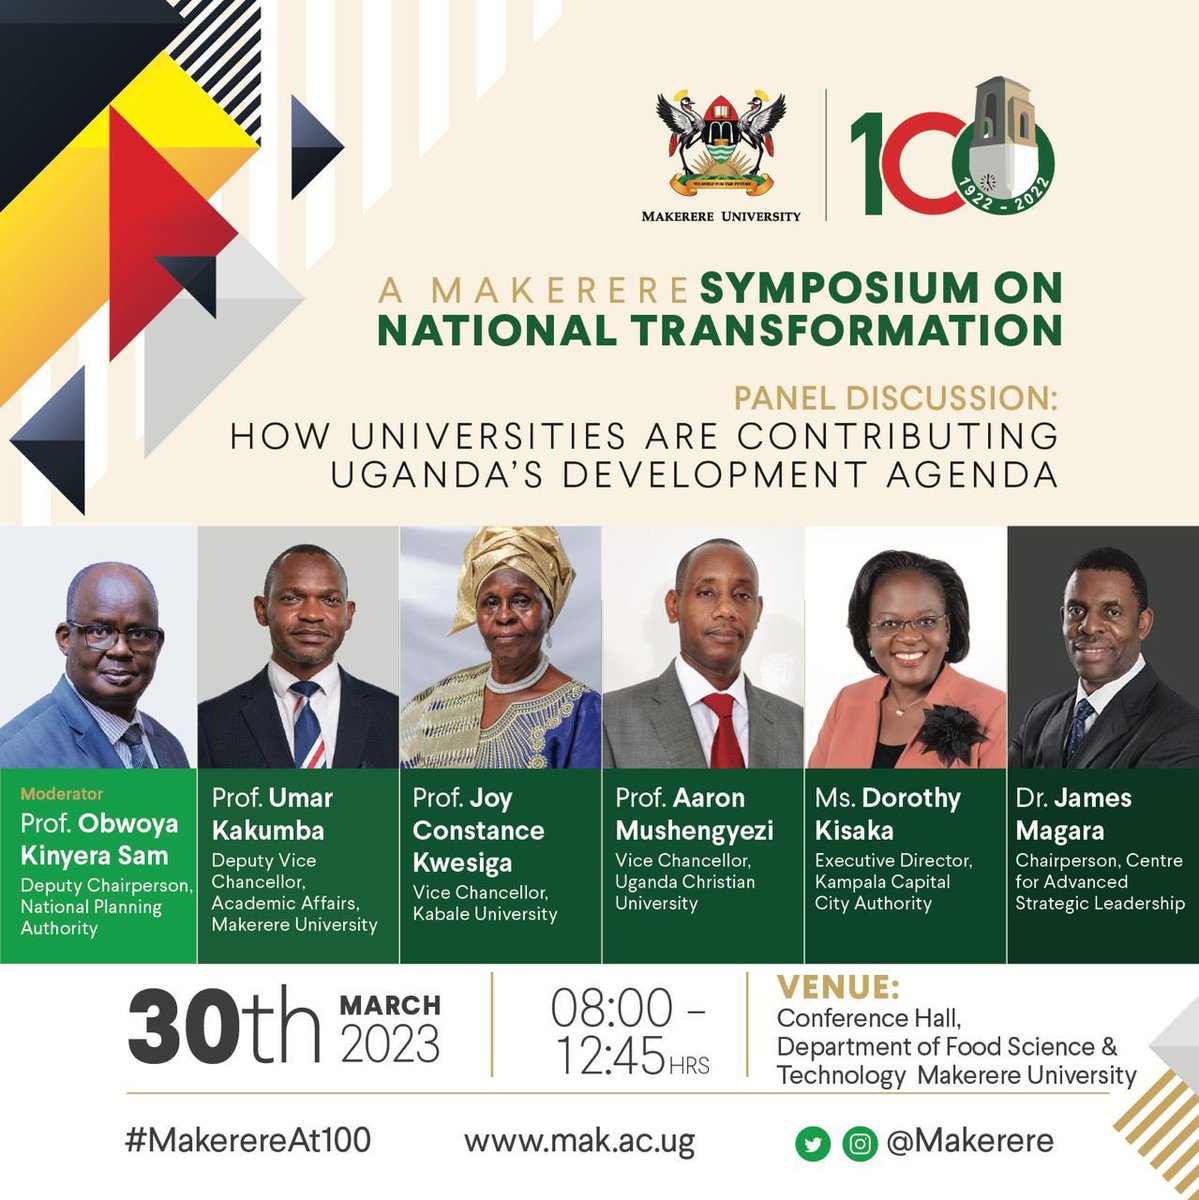 The discussion will be followed by a panel session moderated by Prof Sam Obwoya the Deputy Chairperson National Planning Authority. It will have representatives from public universities as well.
#MakerereAt100